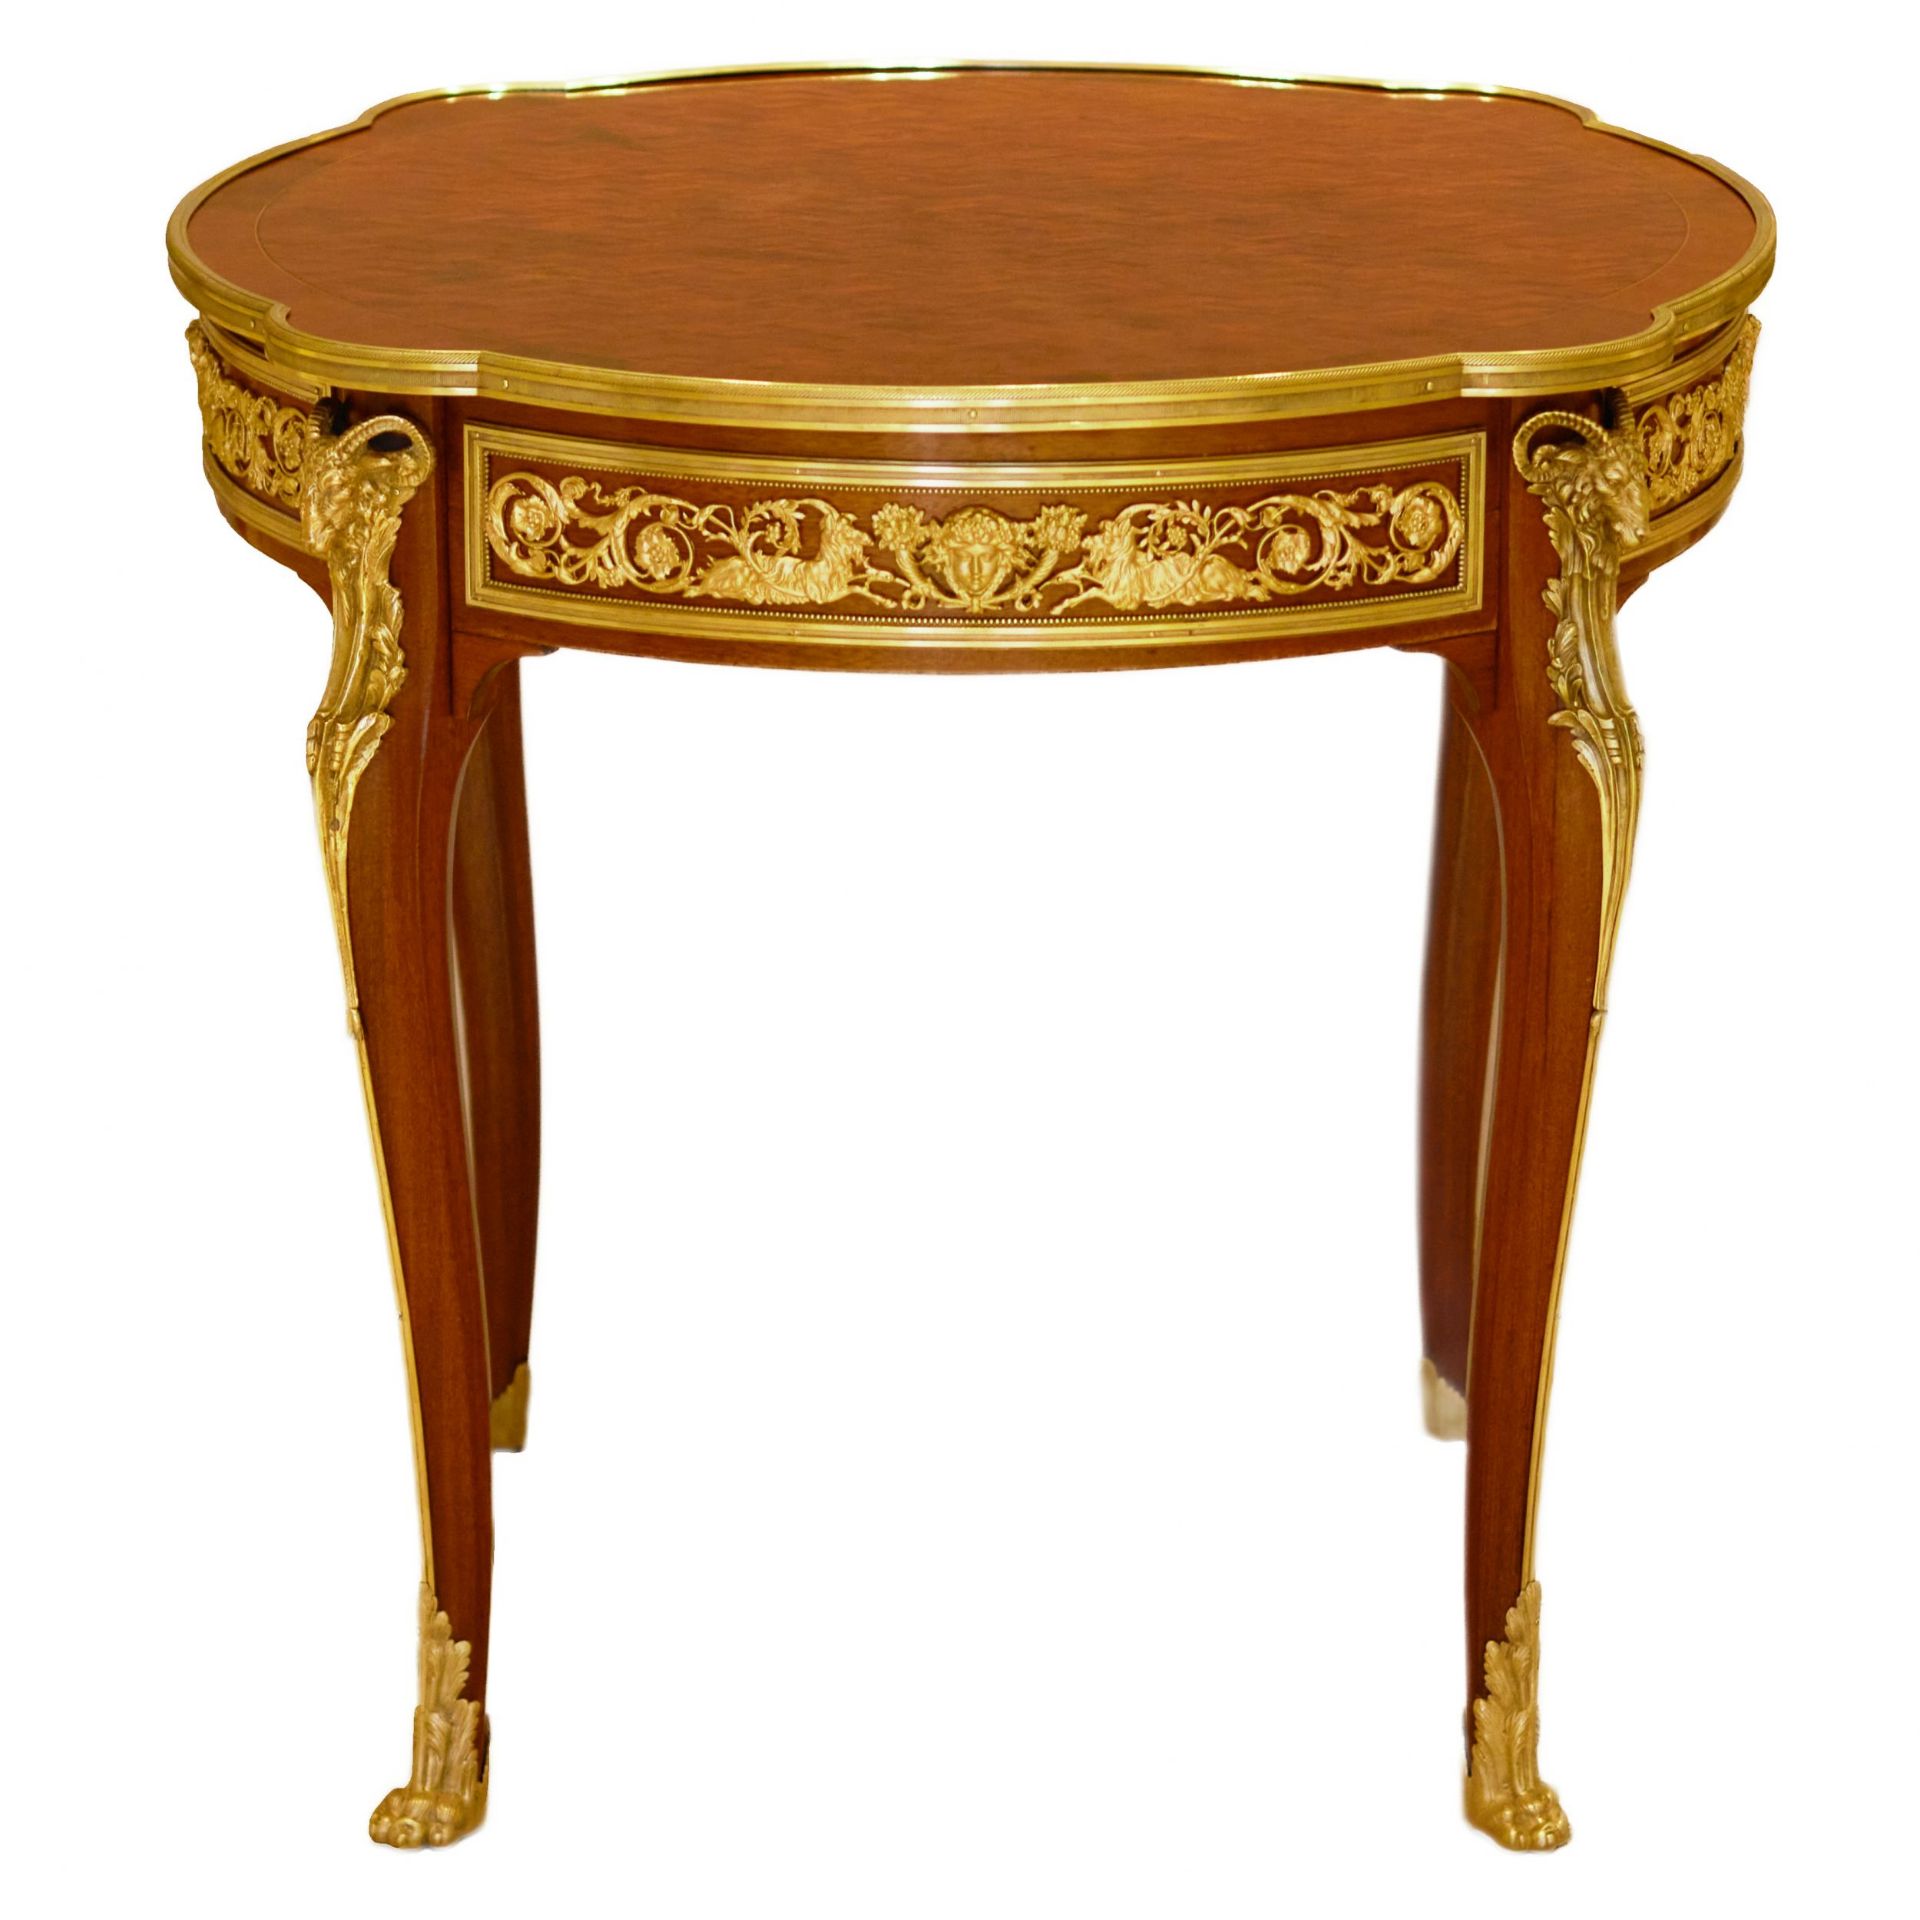 Mahogany table decorated with marquetry in the style of Louis XV, Francois Linke. Late 19th century - Bild 2 aus 6